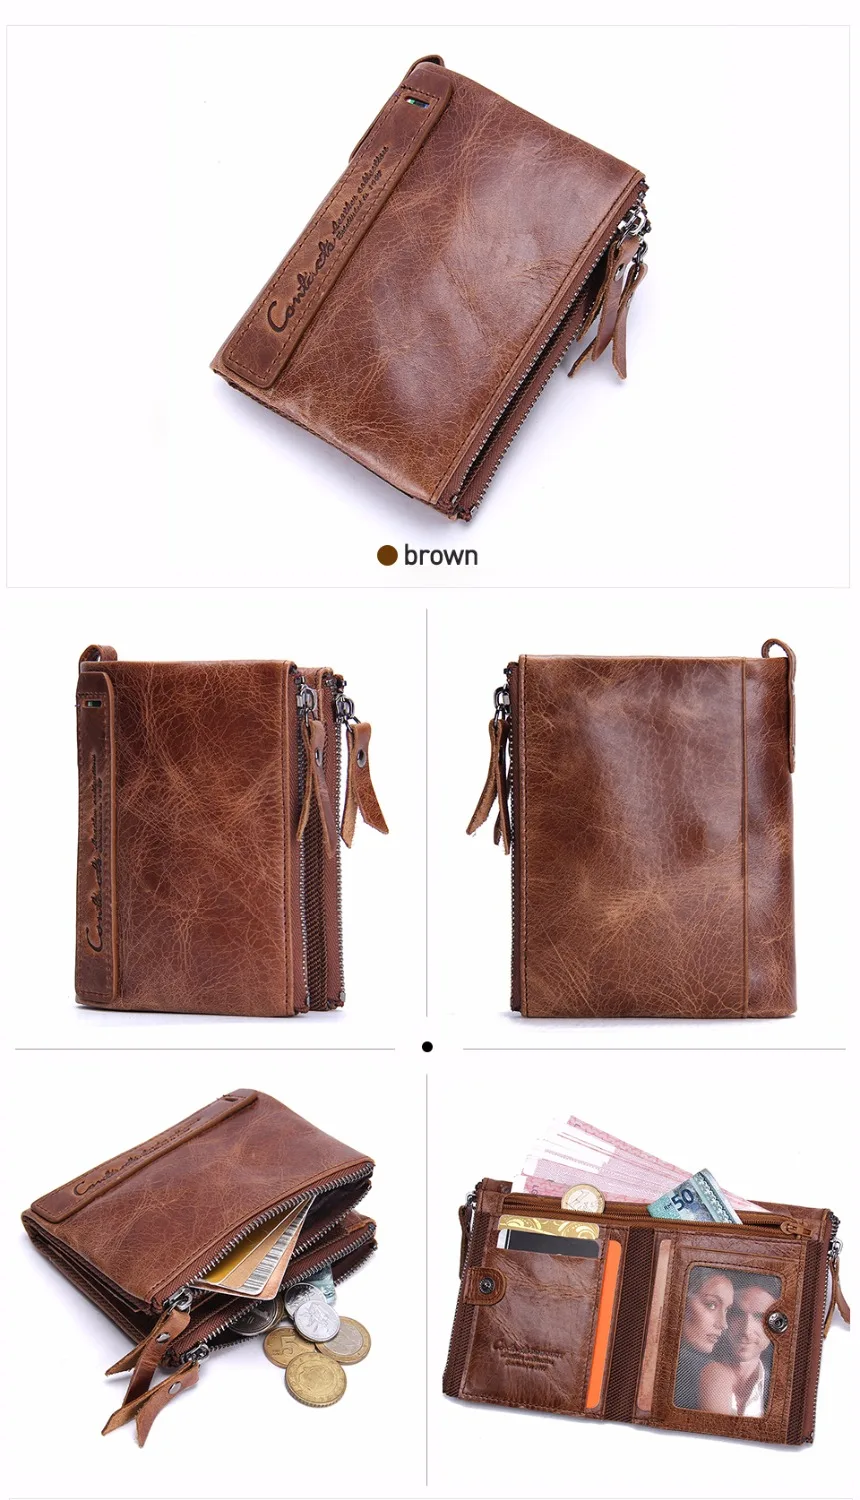 HOT SALE 2020 Coin Bag Zipper Wallet Women Genuine Leather Wallets Purse Fashion Short Purse With Credit Card Holder Hasp Design